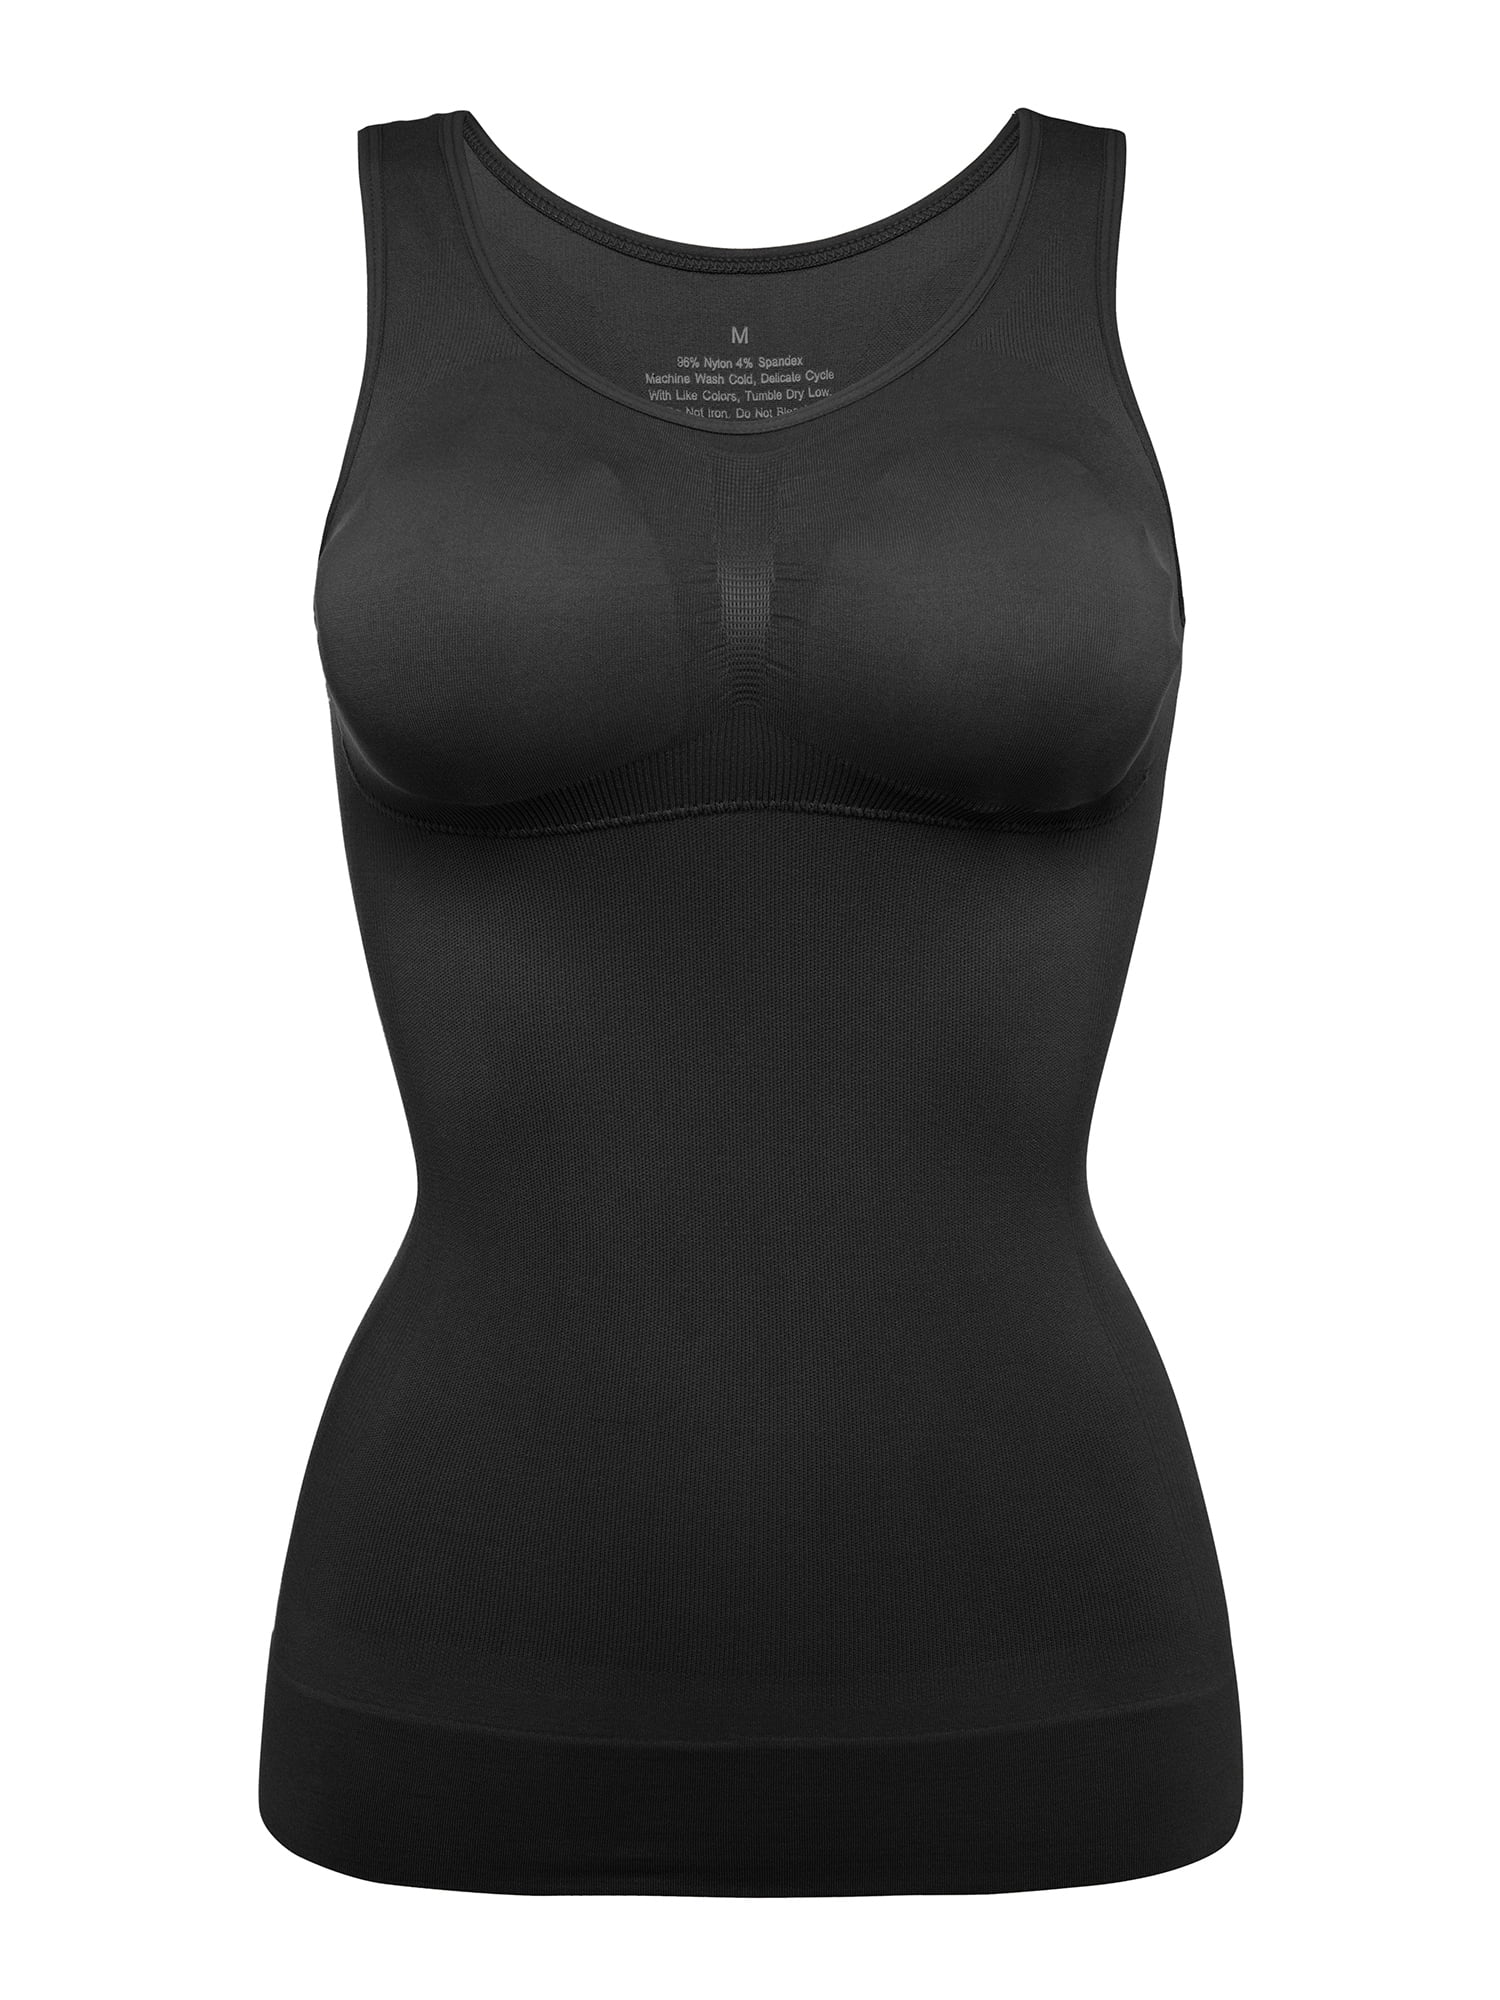 SLIMBELLE Shapewear Tank Top Cami Shaper with Built-in Removable Bra Pads Tummy Control Camisole Body Shaper for Women 